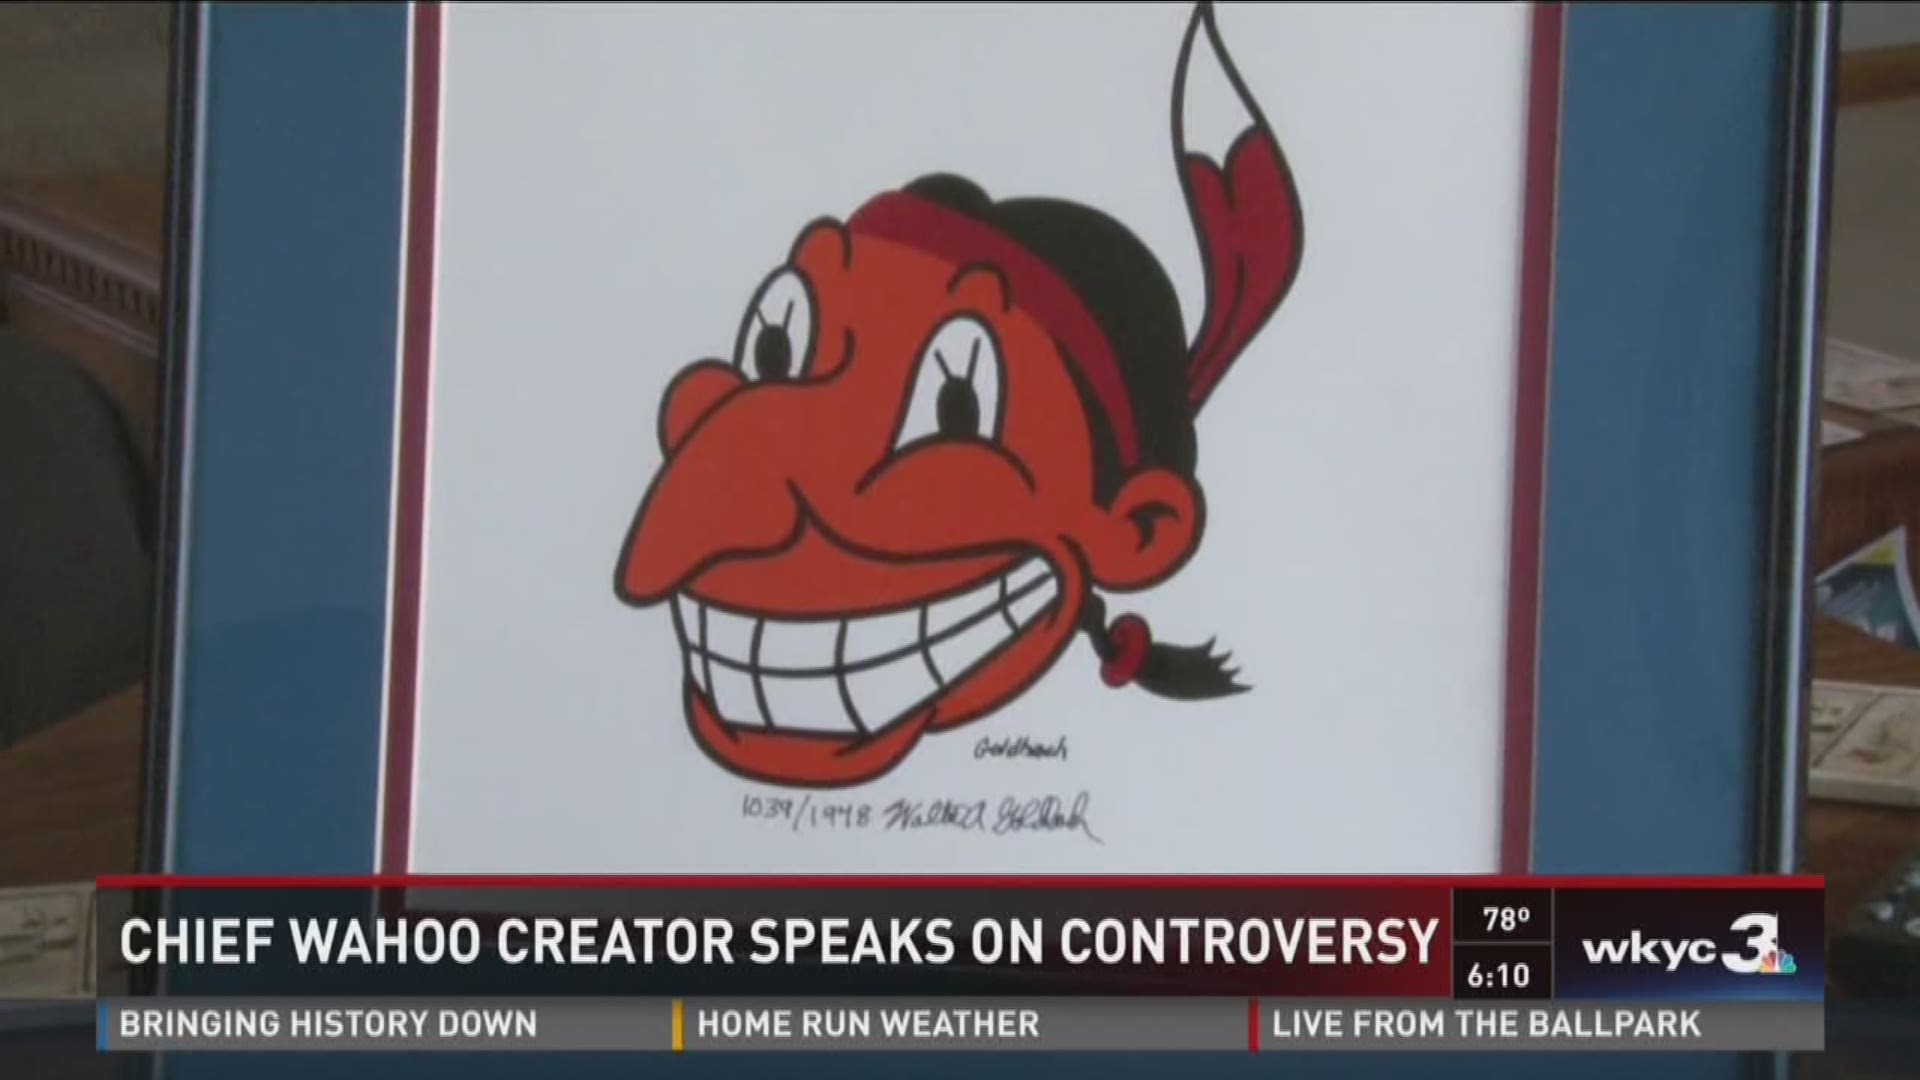 Chief Wahoo' out: the mascot debate 